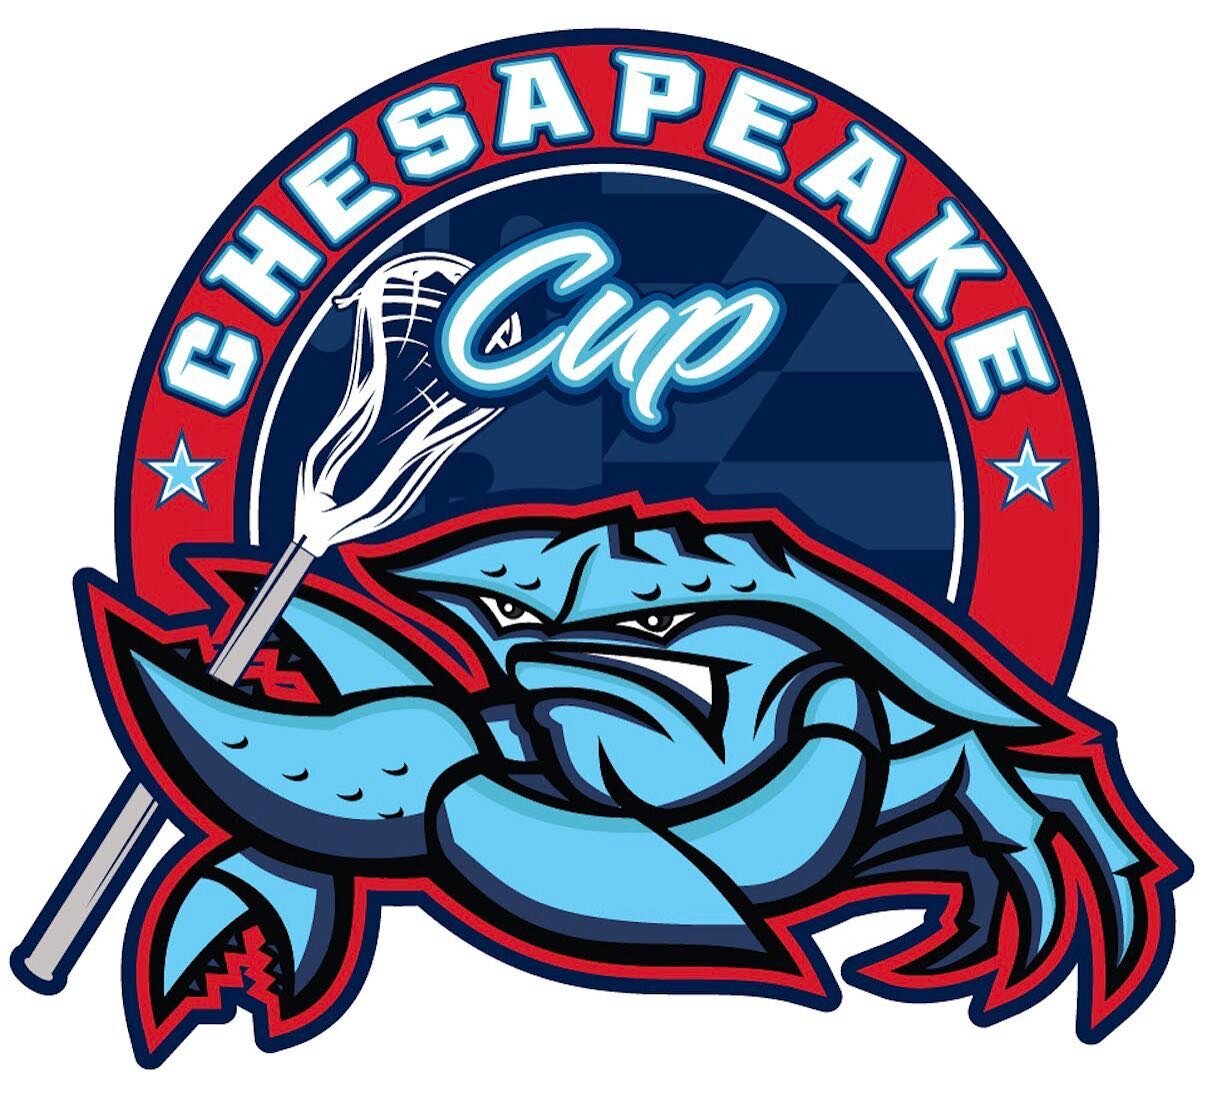 The Chesapeake Cup signups are now open for Maryland&rsquo;s premier fall tournament!

Team entry and free-agent options are available.

📍Cedar Lane Regional Park in Bel Air, Maryland
📅 October 1st, 2022
🍔 @belair_looneys tournament party
🏆 Champ